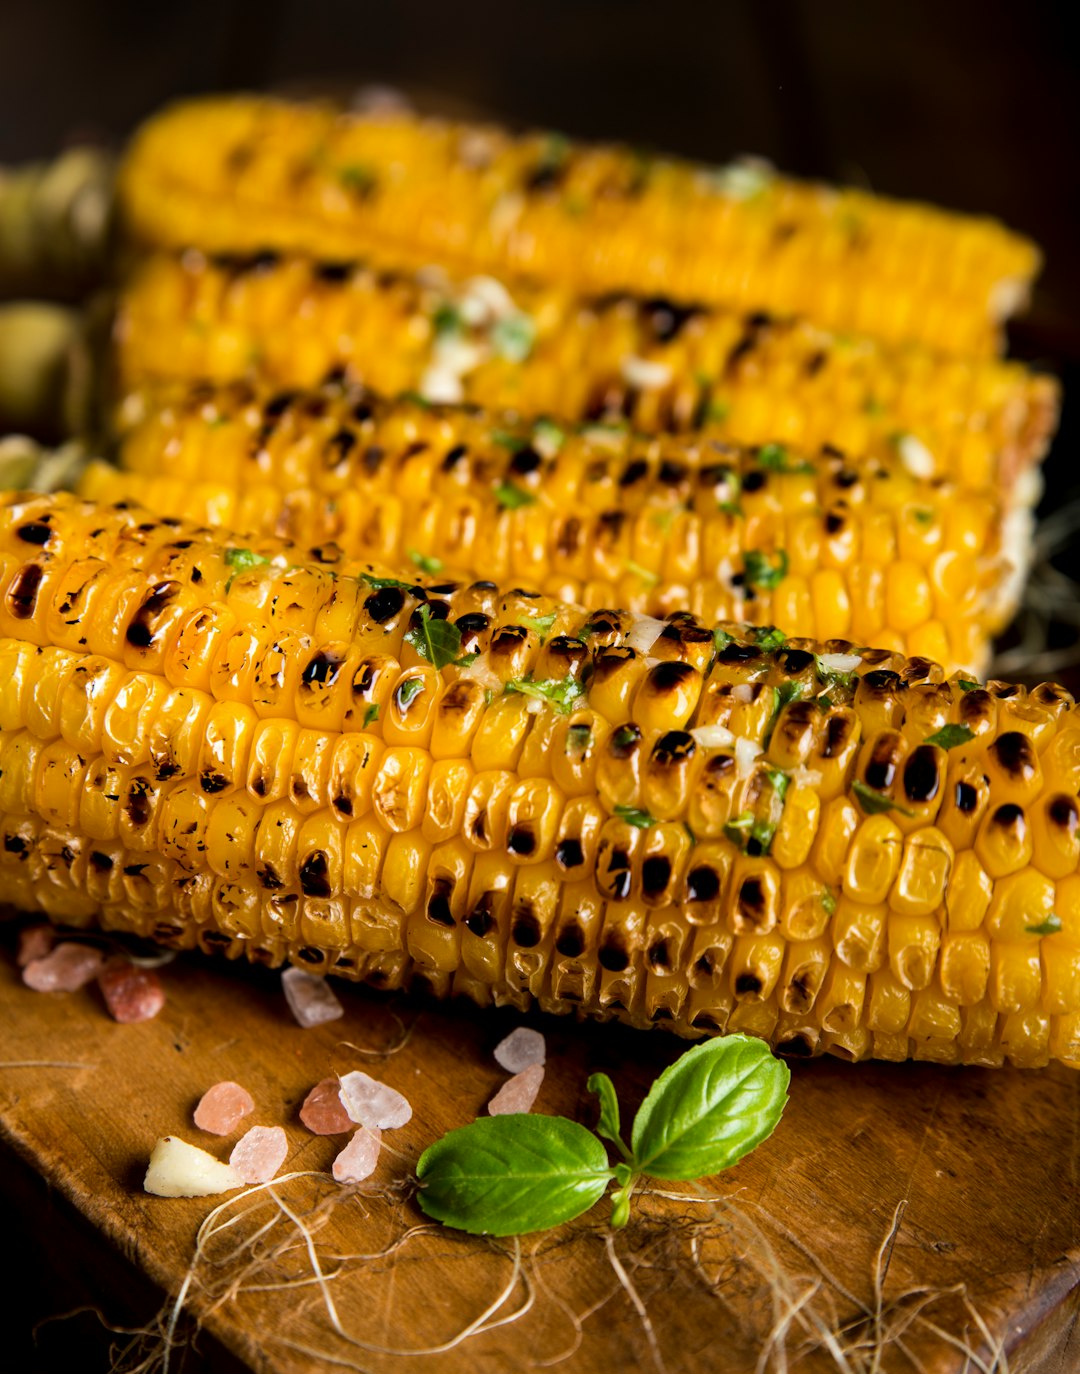 Corn, food, yellow, kernel and vegetable HD photo by Dragne Marius (@marius_dragne) on Unsplash